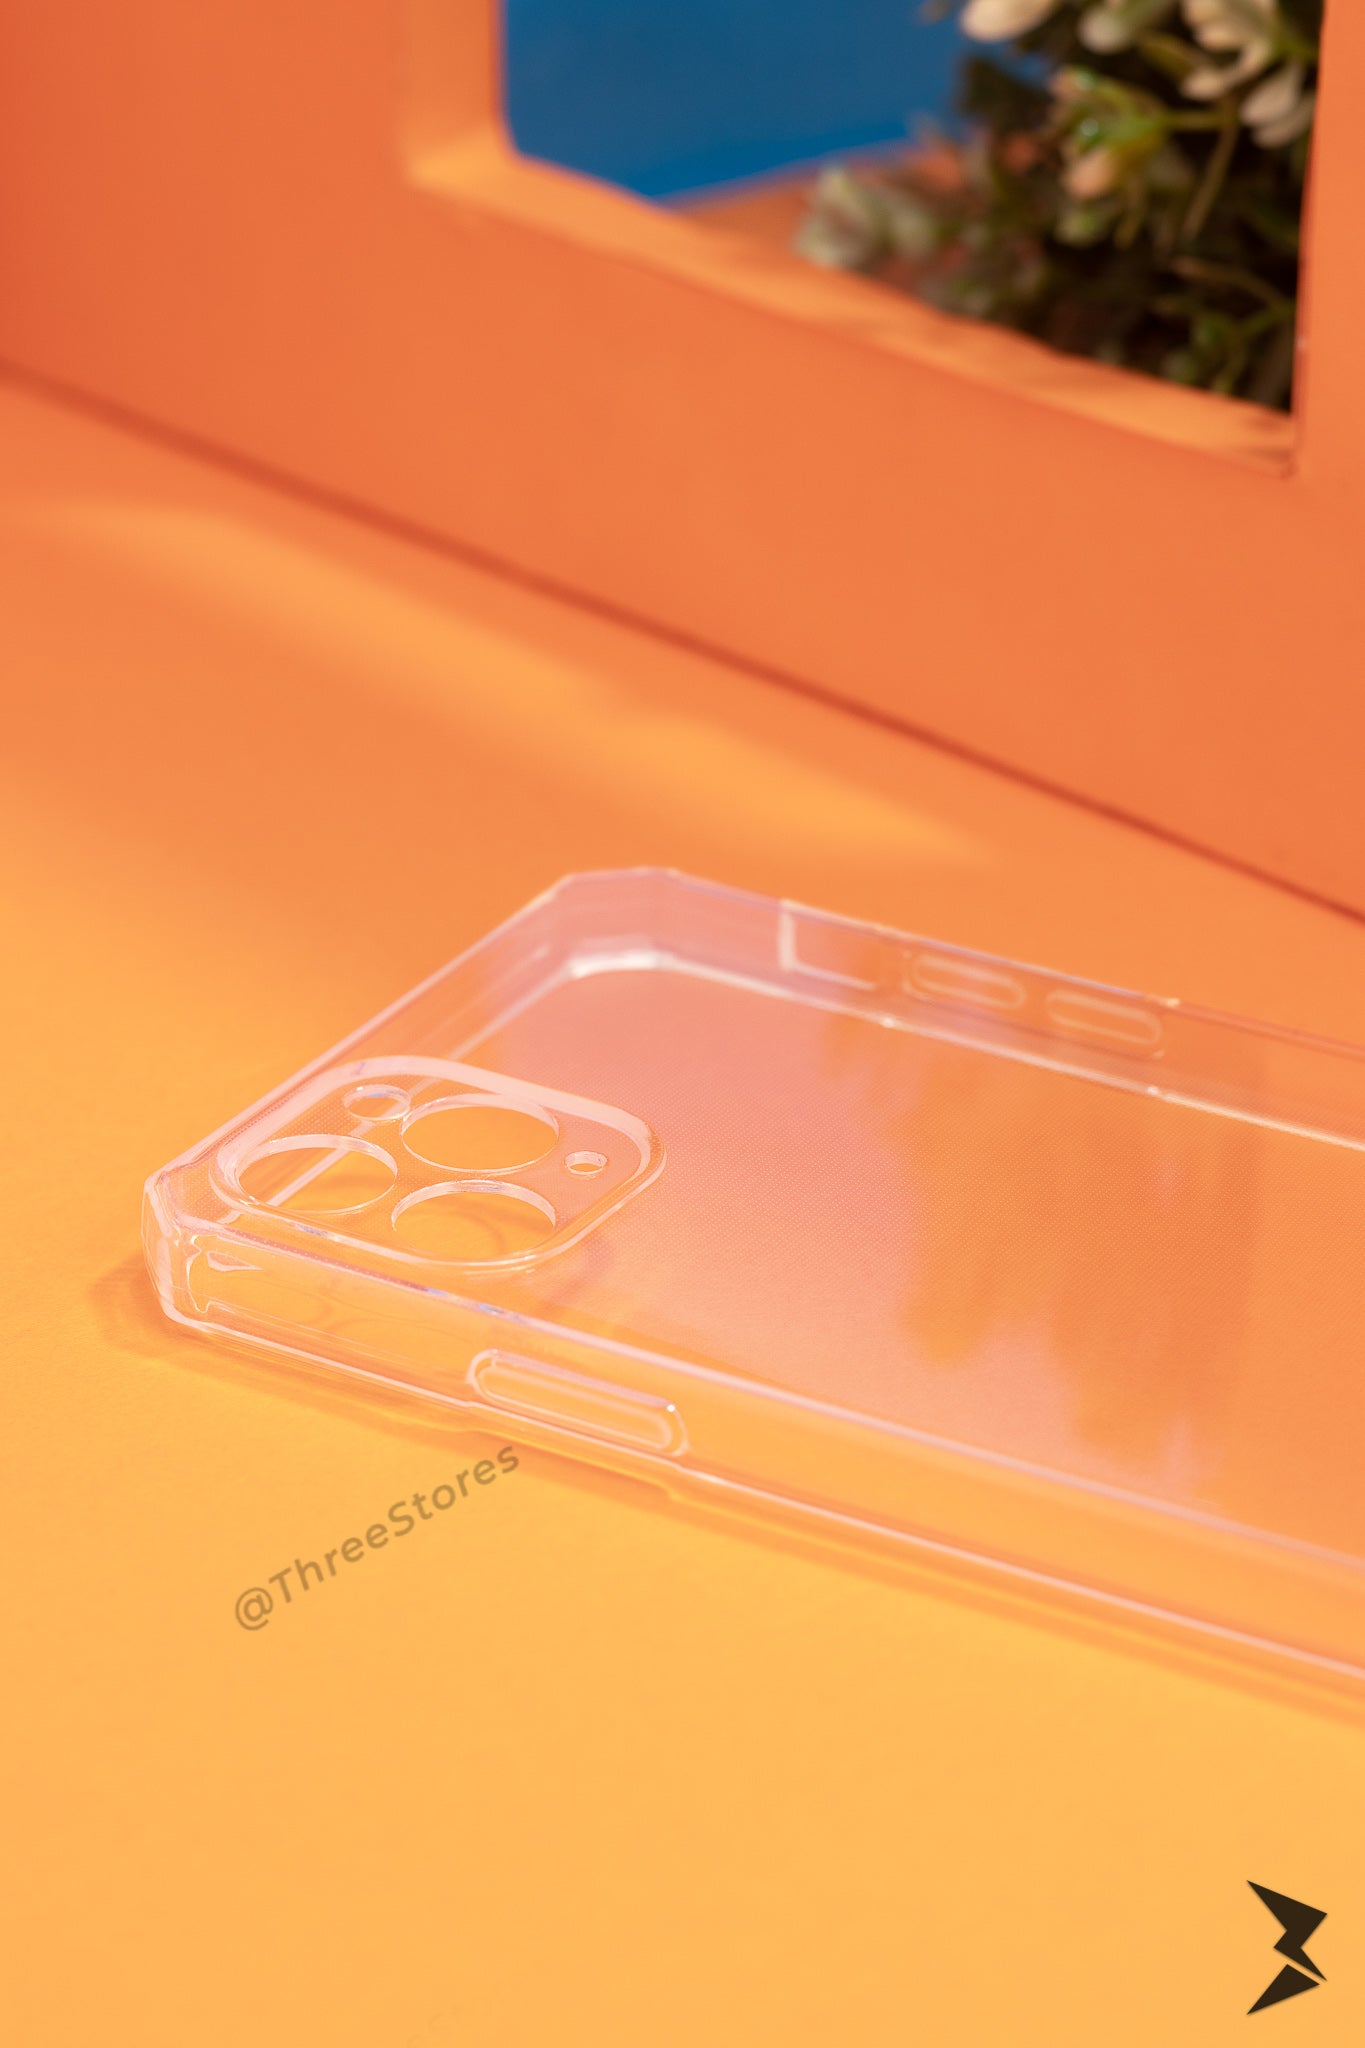 Lanex Clear Case iPhone 11 Pro Max